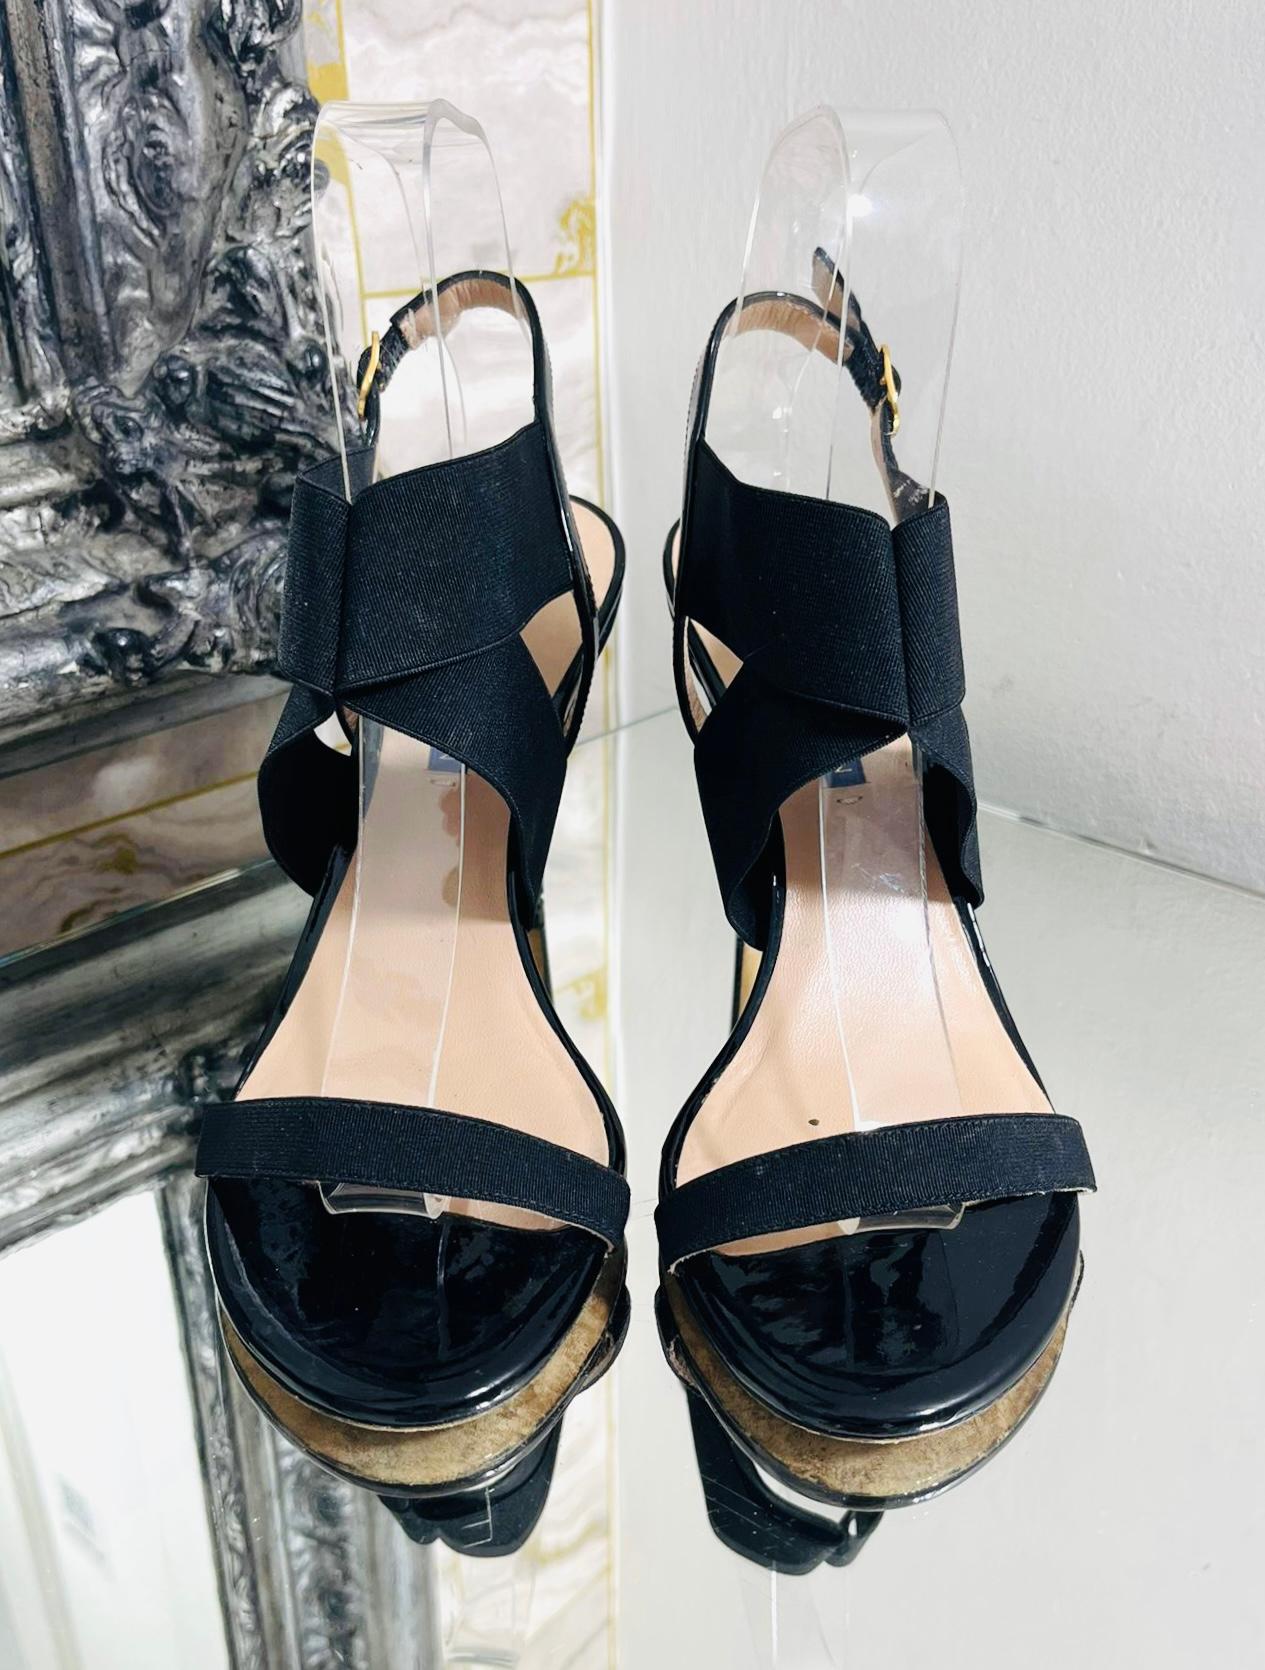 Stuart Weitzman Cross Strap Patent Leather Sandals

Black 'Alana' sandals designed with open round toes and buckled ankle strap.

Featuring wide, elastic straps to the top and single, thin strap to the vamp.

Styled with stiletto heel and leather